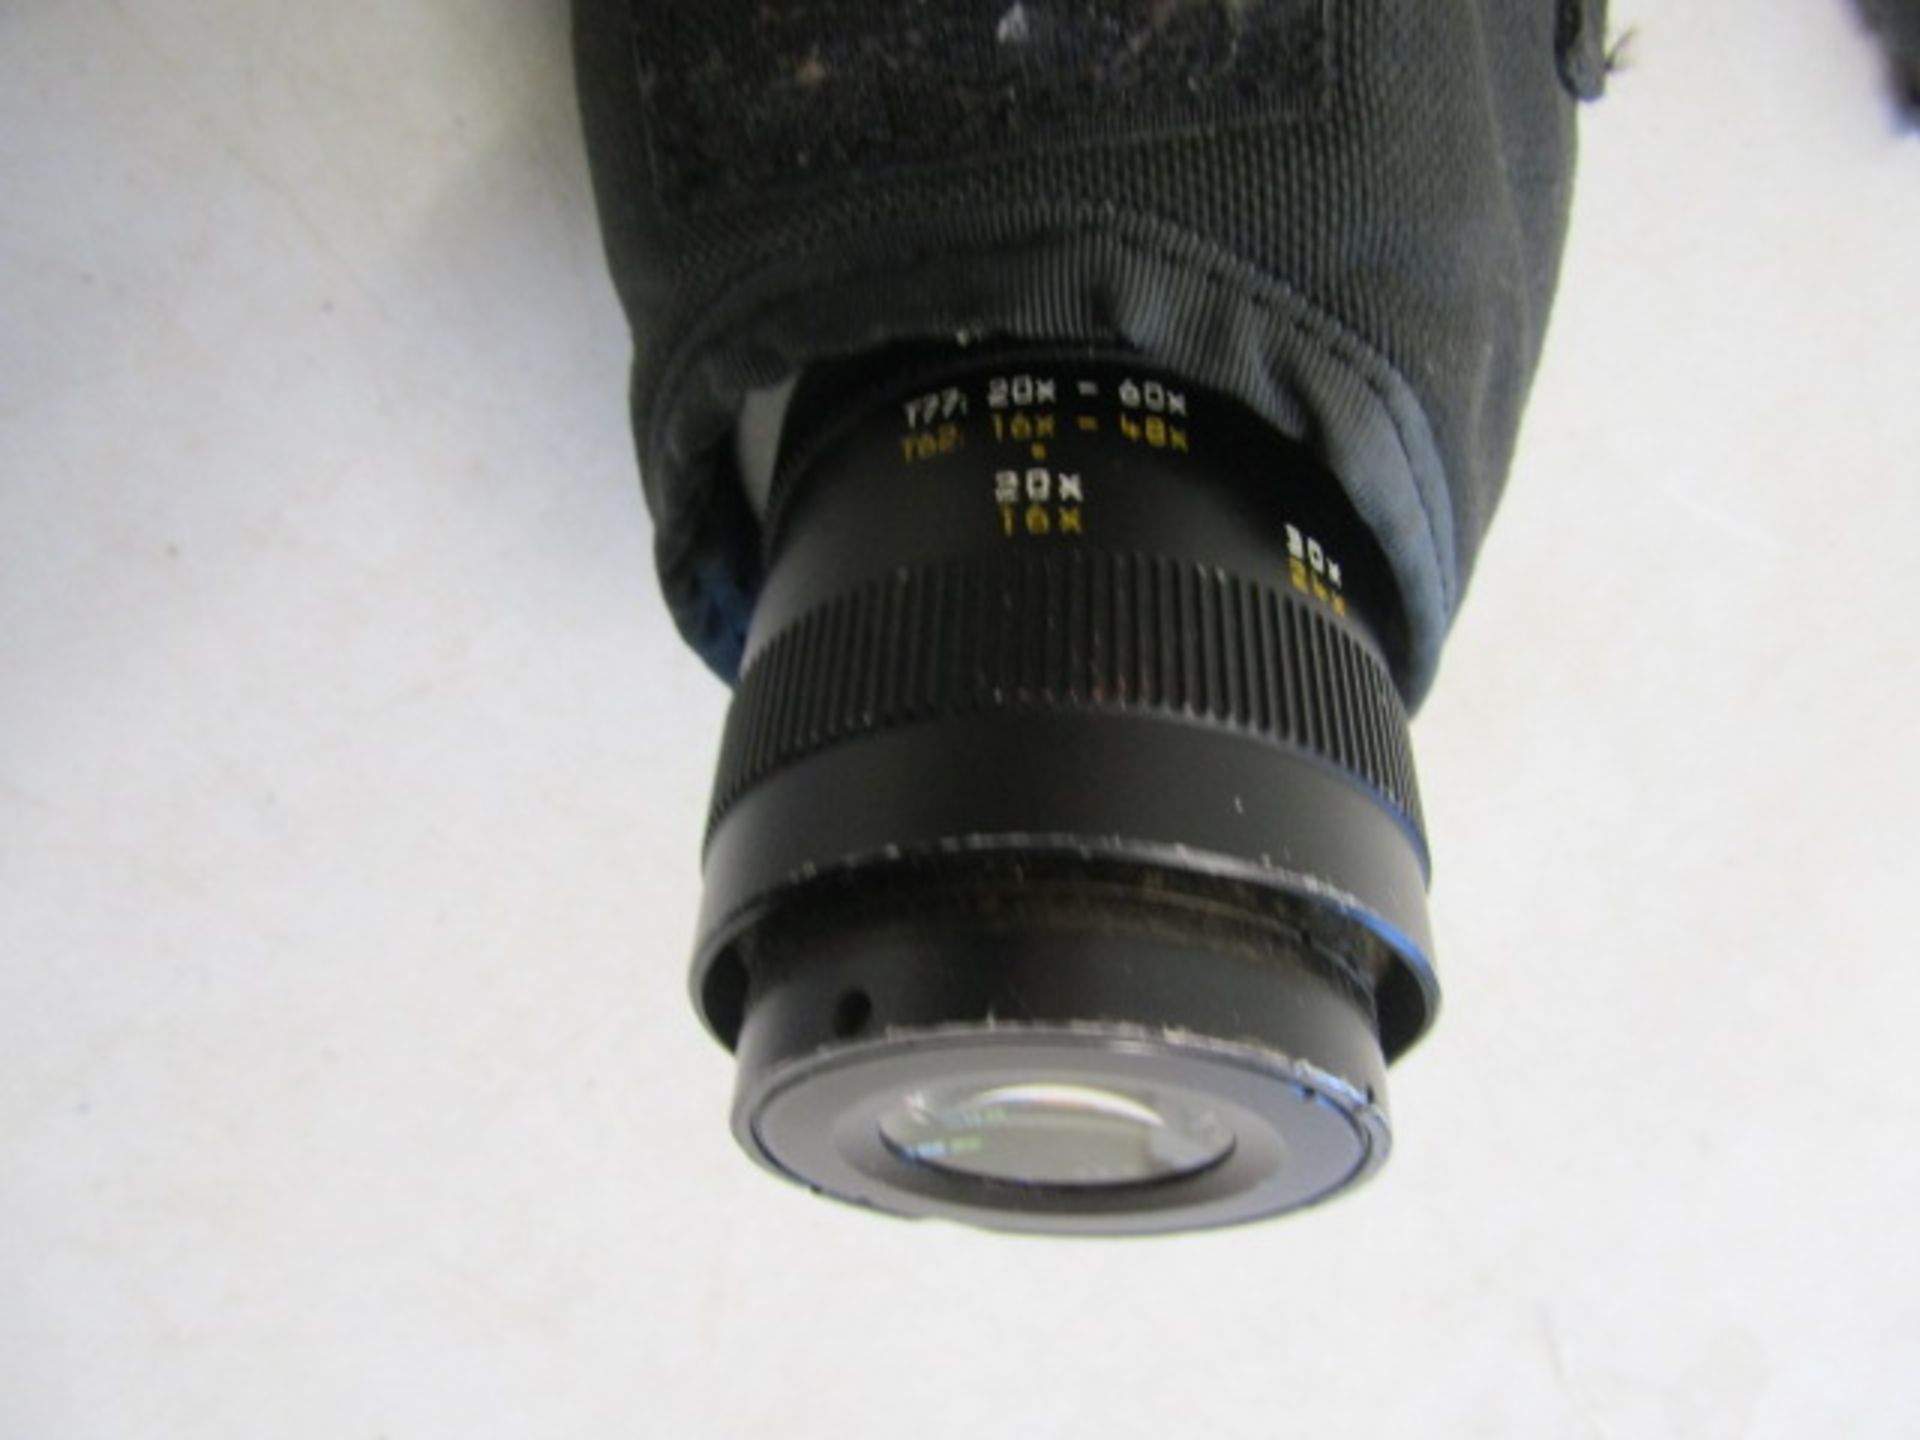 Leica Televid 77 spotting scope 20x60 eye piece, manfrotto quick release, shoe permanently attached - Image 6 of 6